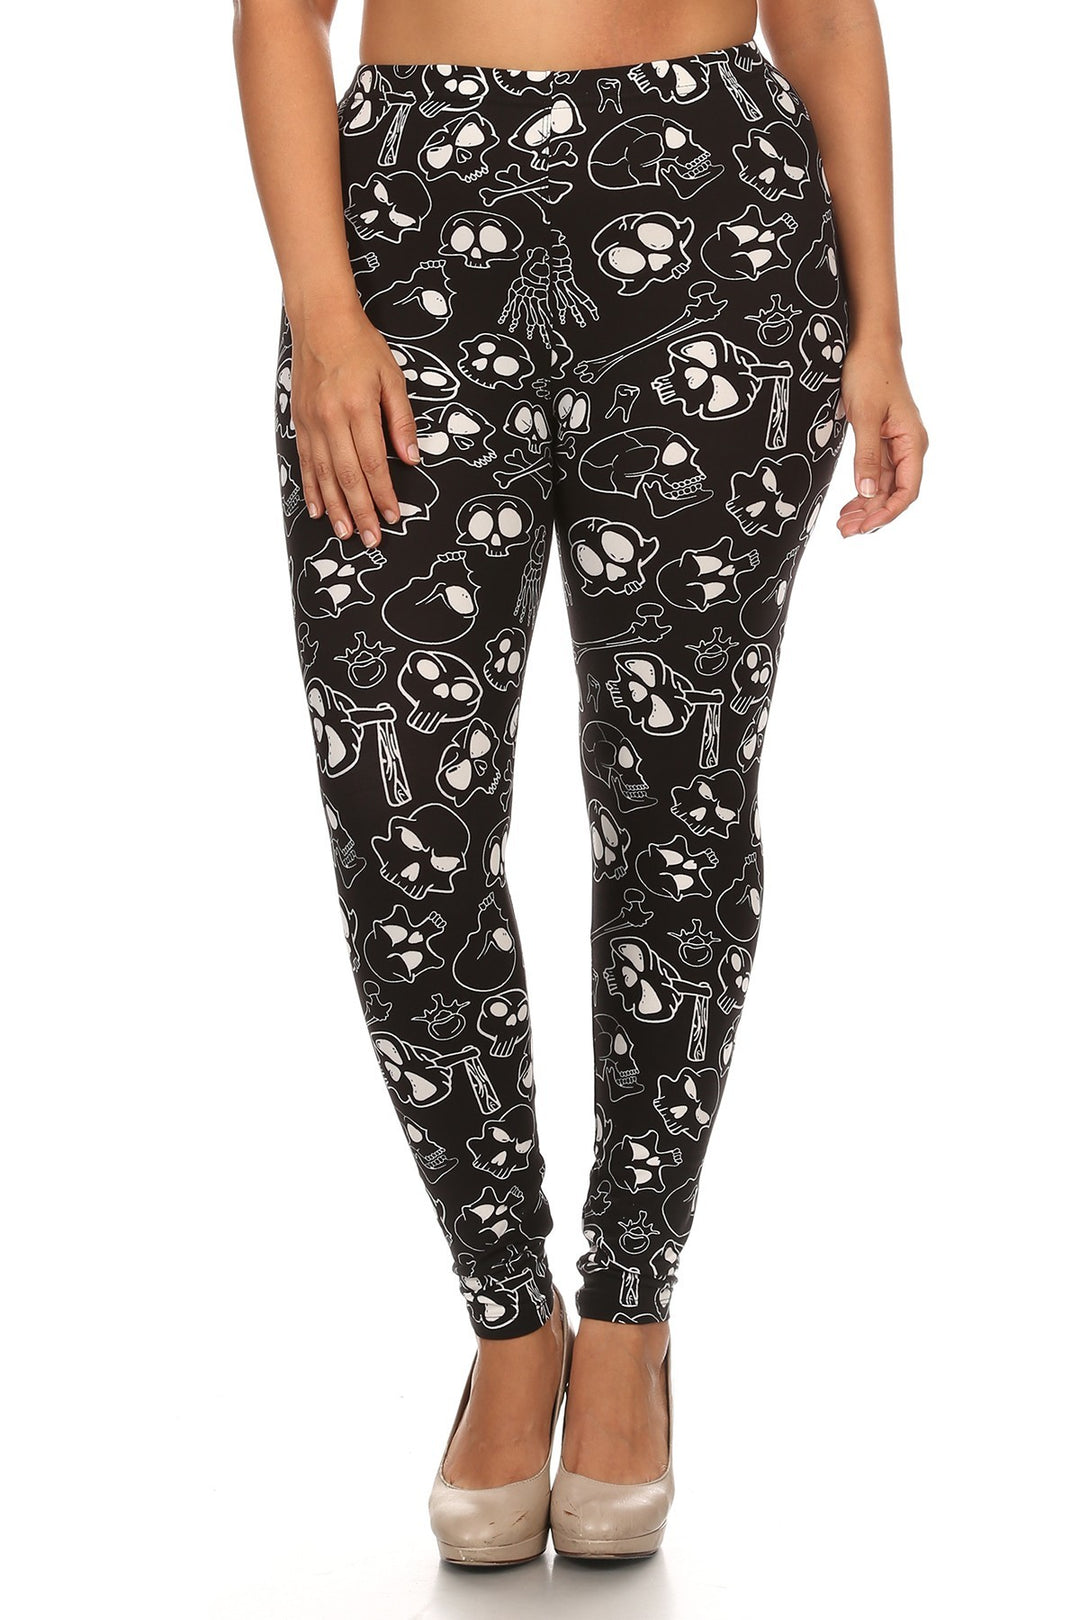 Women Plus Size Print, Full Length Leggings In A Fitted Style With A Banded High Waist